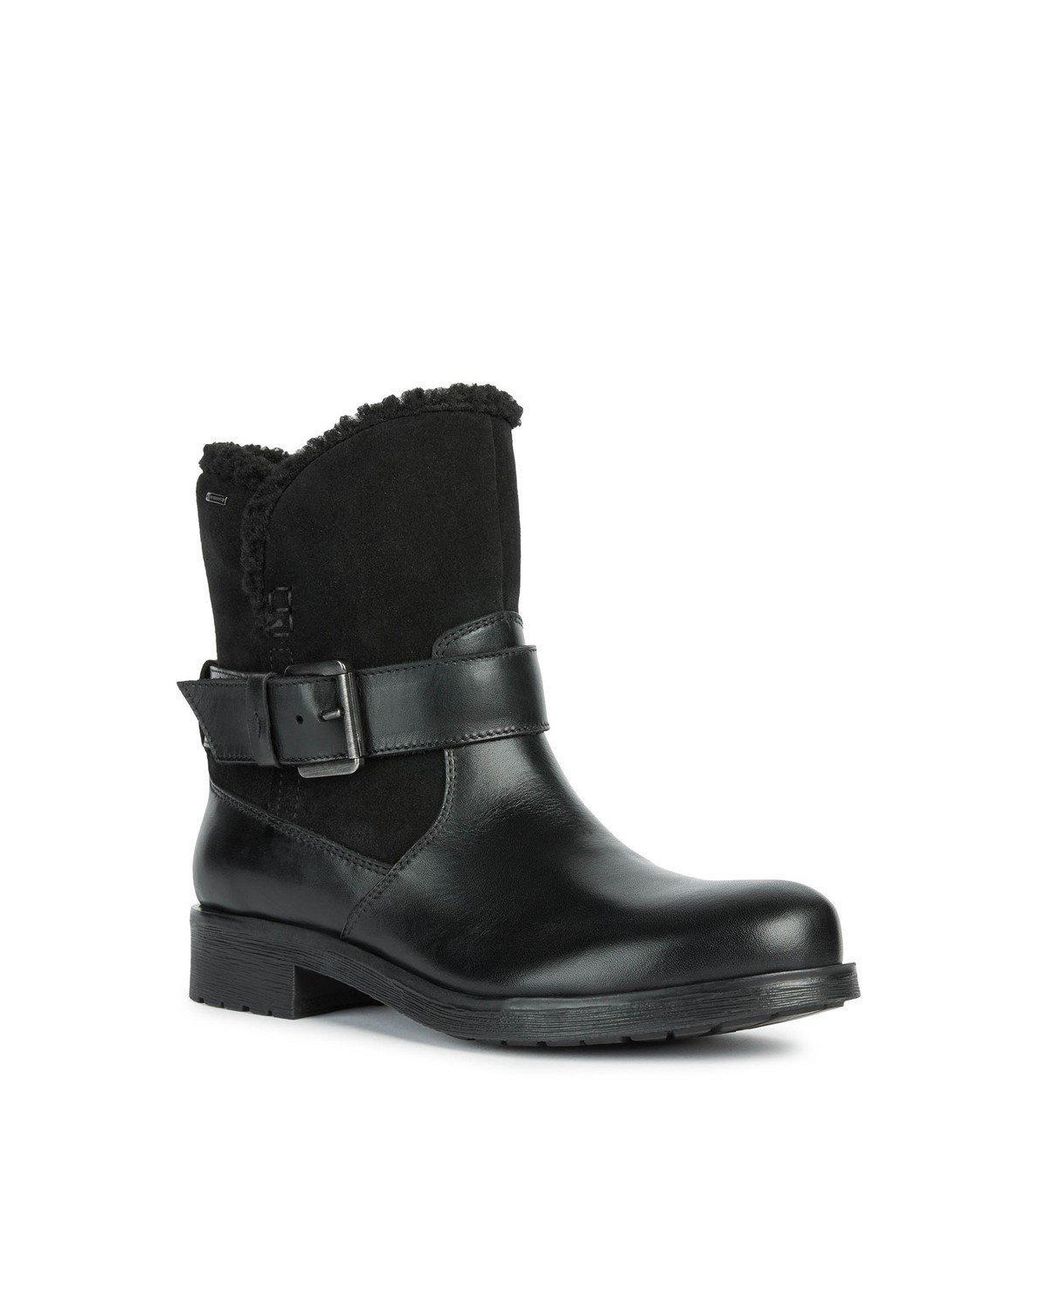 Geox Black 'd Rawelle B' Abx A Leather Ankle Boots | Lyst UK